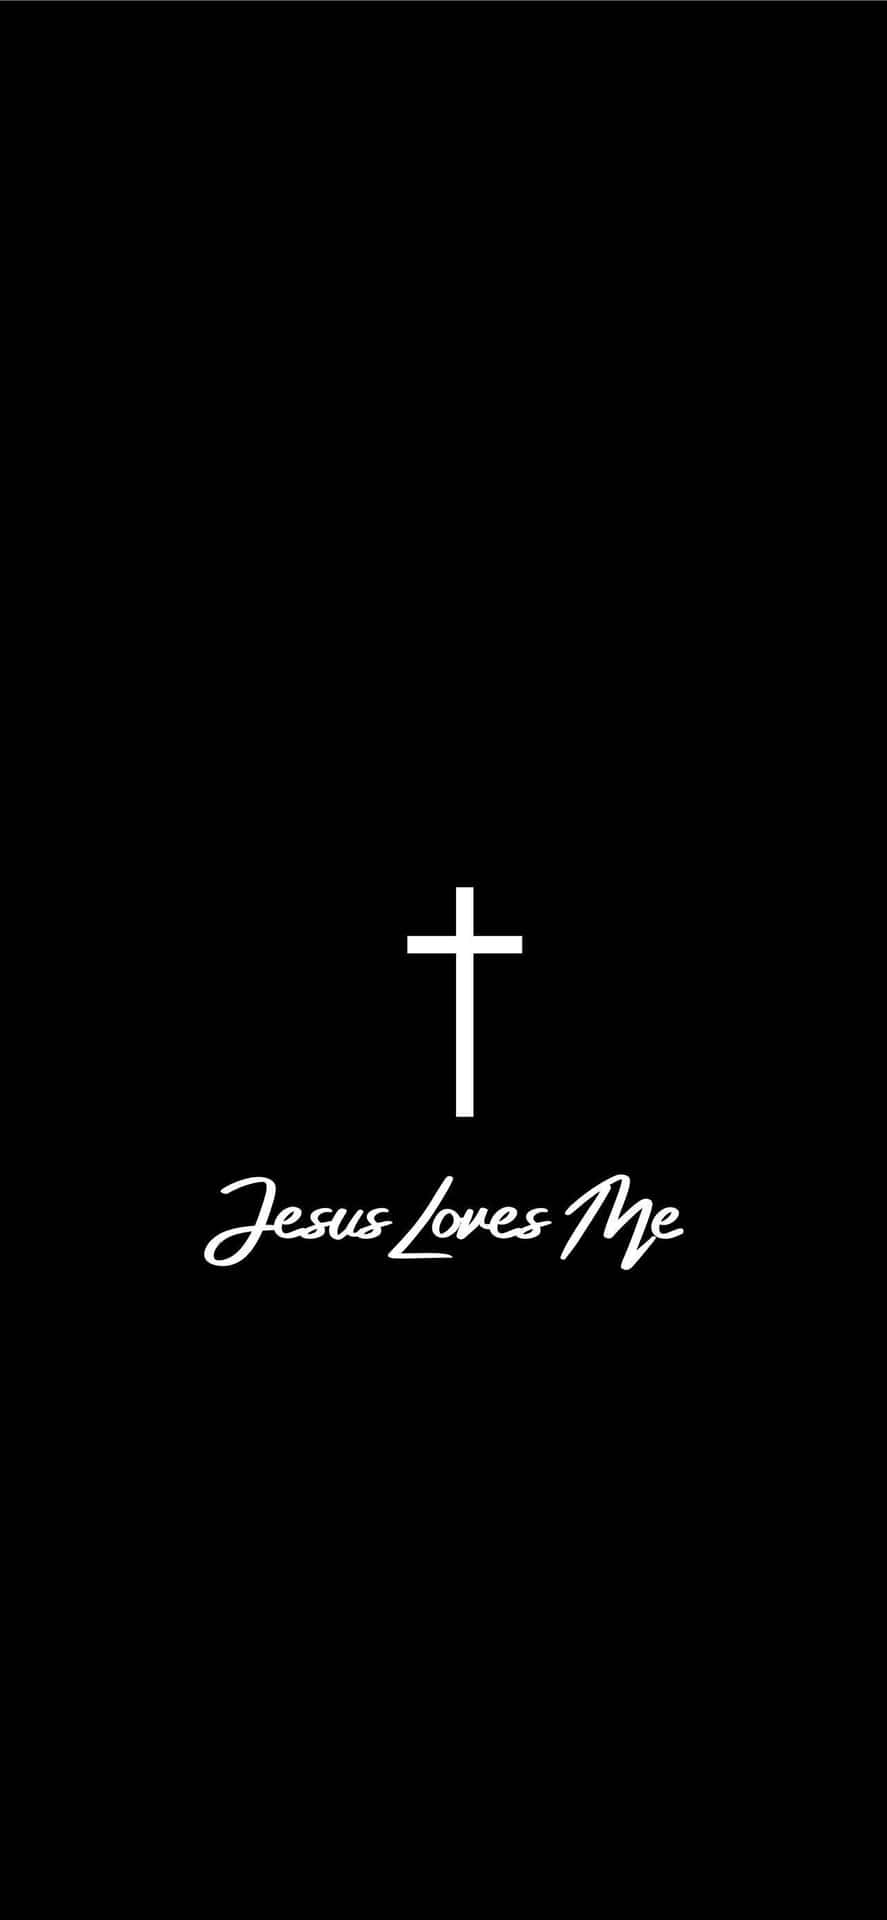 Download Jesus-Themed Phone Case for IPhone Wallpaper | Wallpapers.com